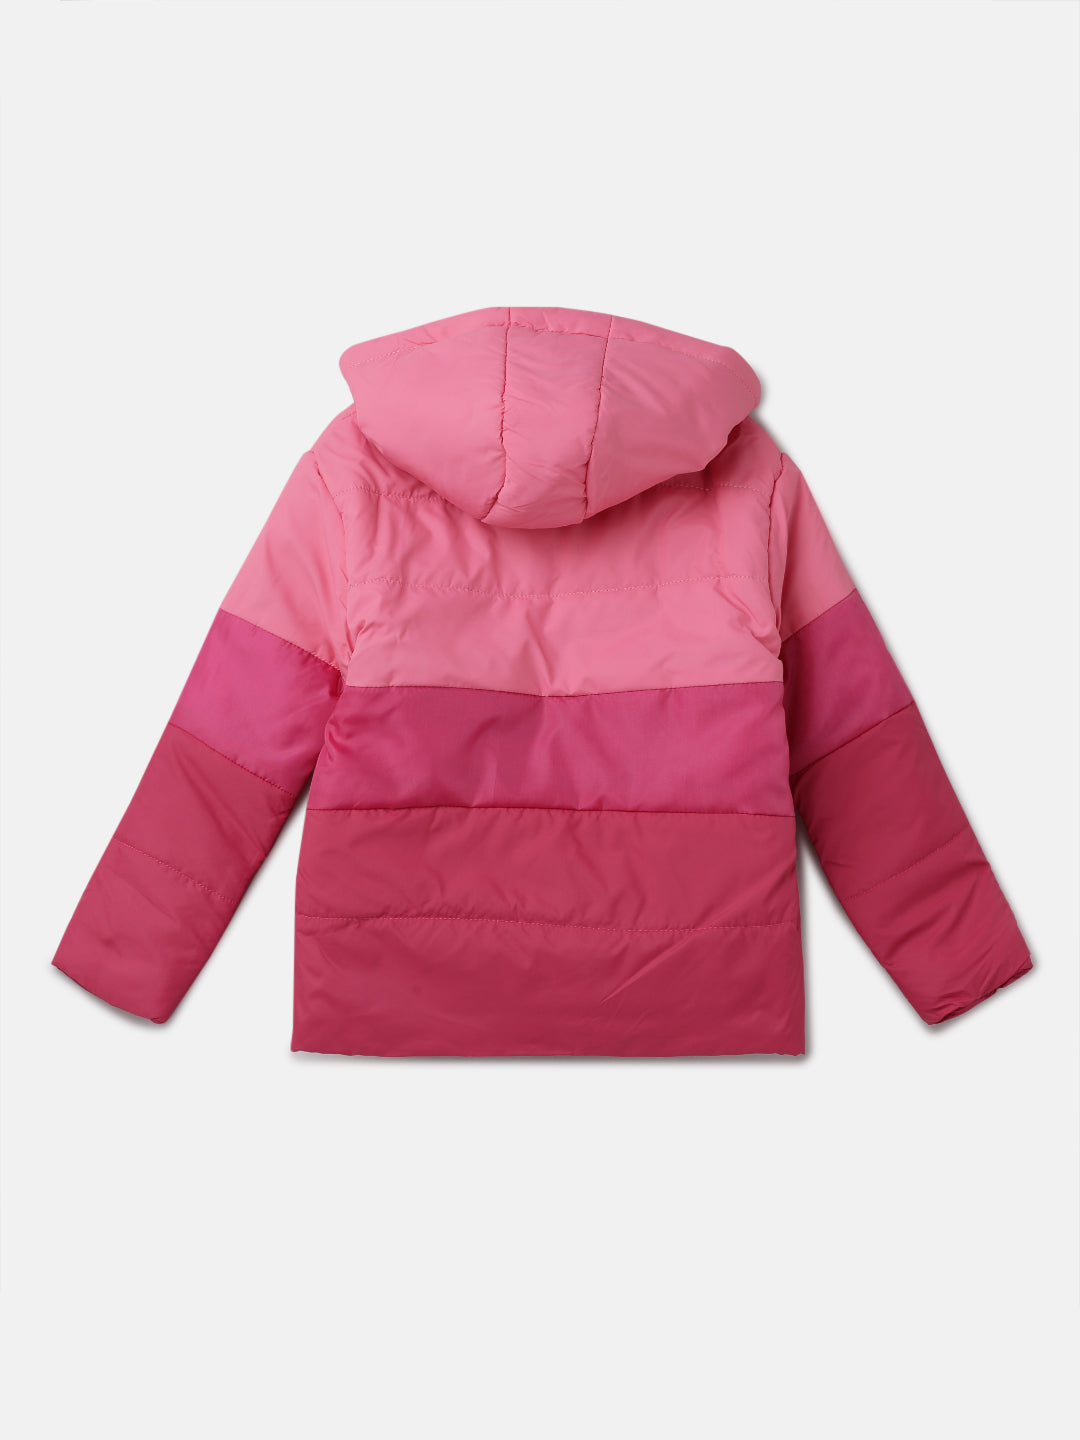 Girls Colour Blocked Puffa Jacket Pink with Hood